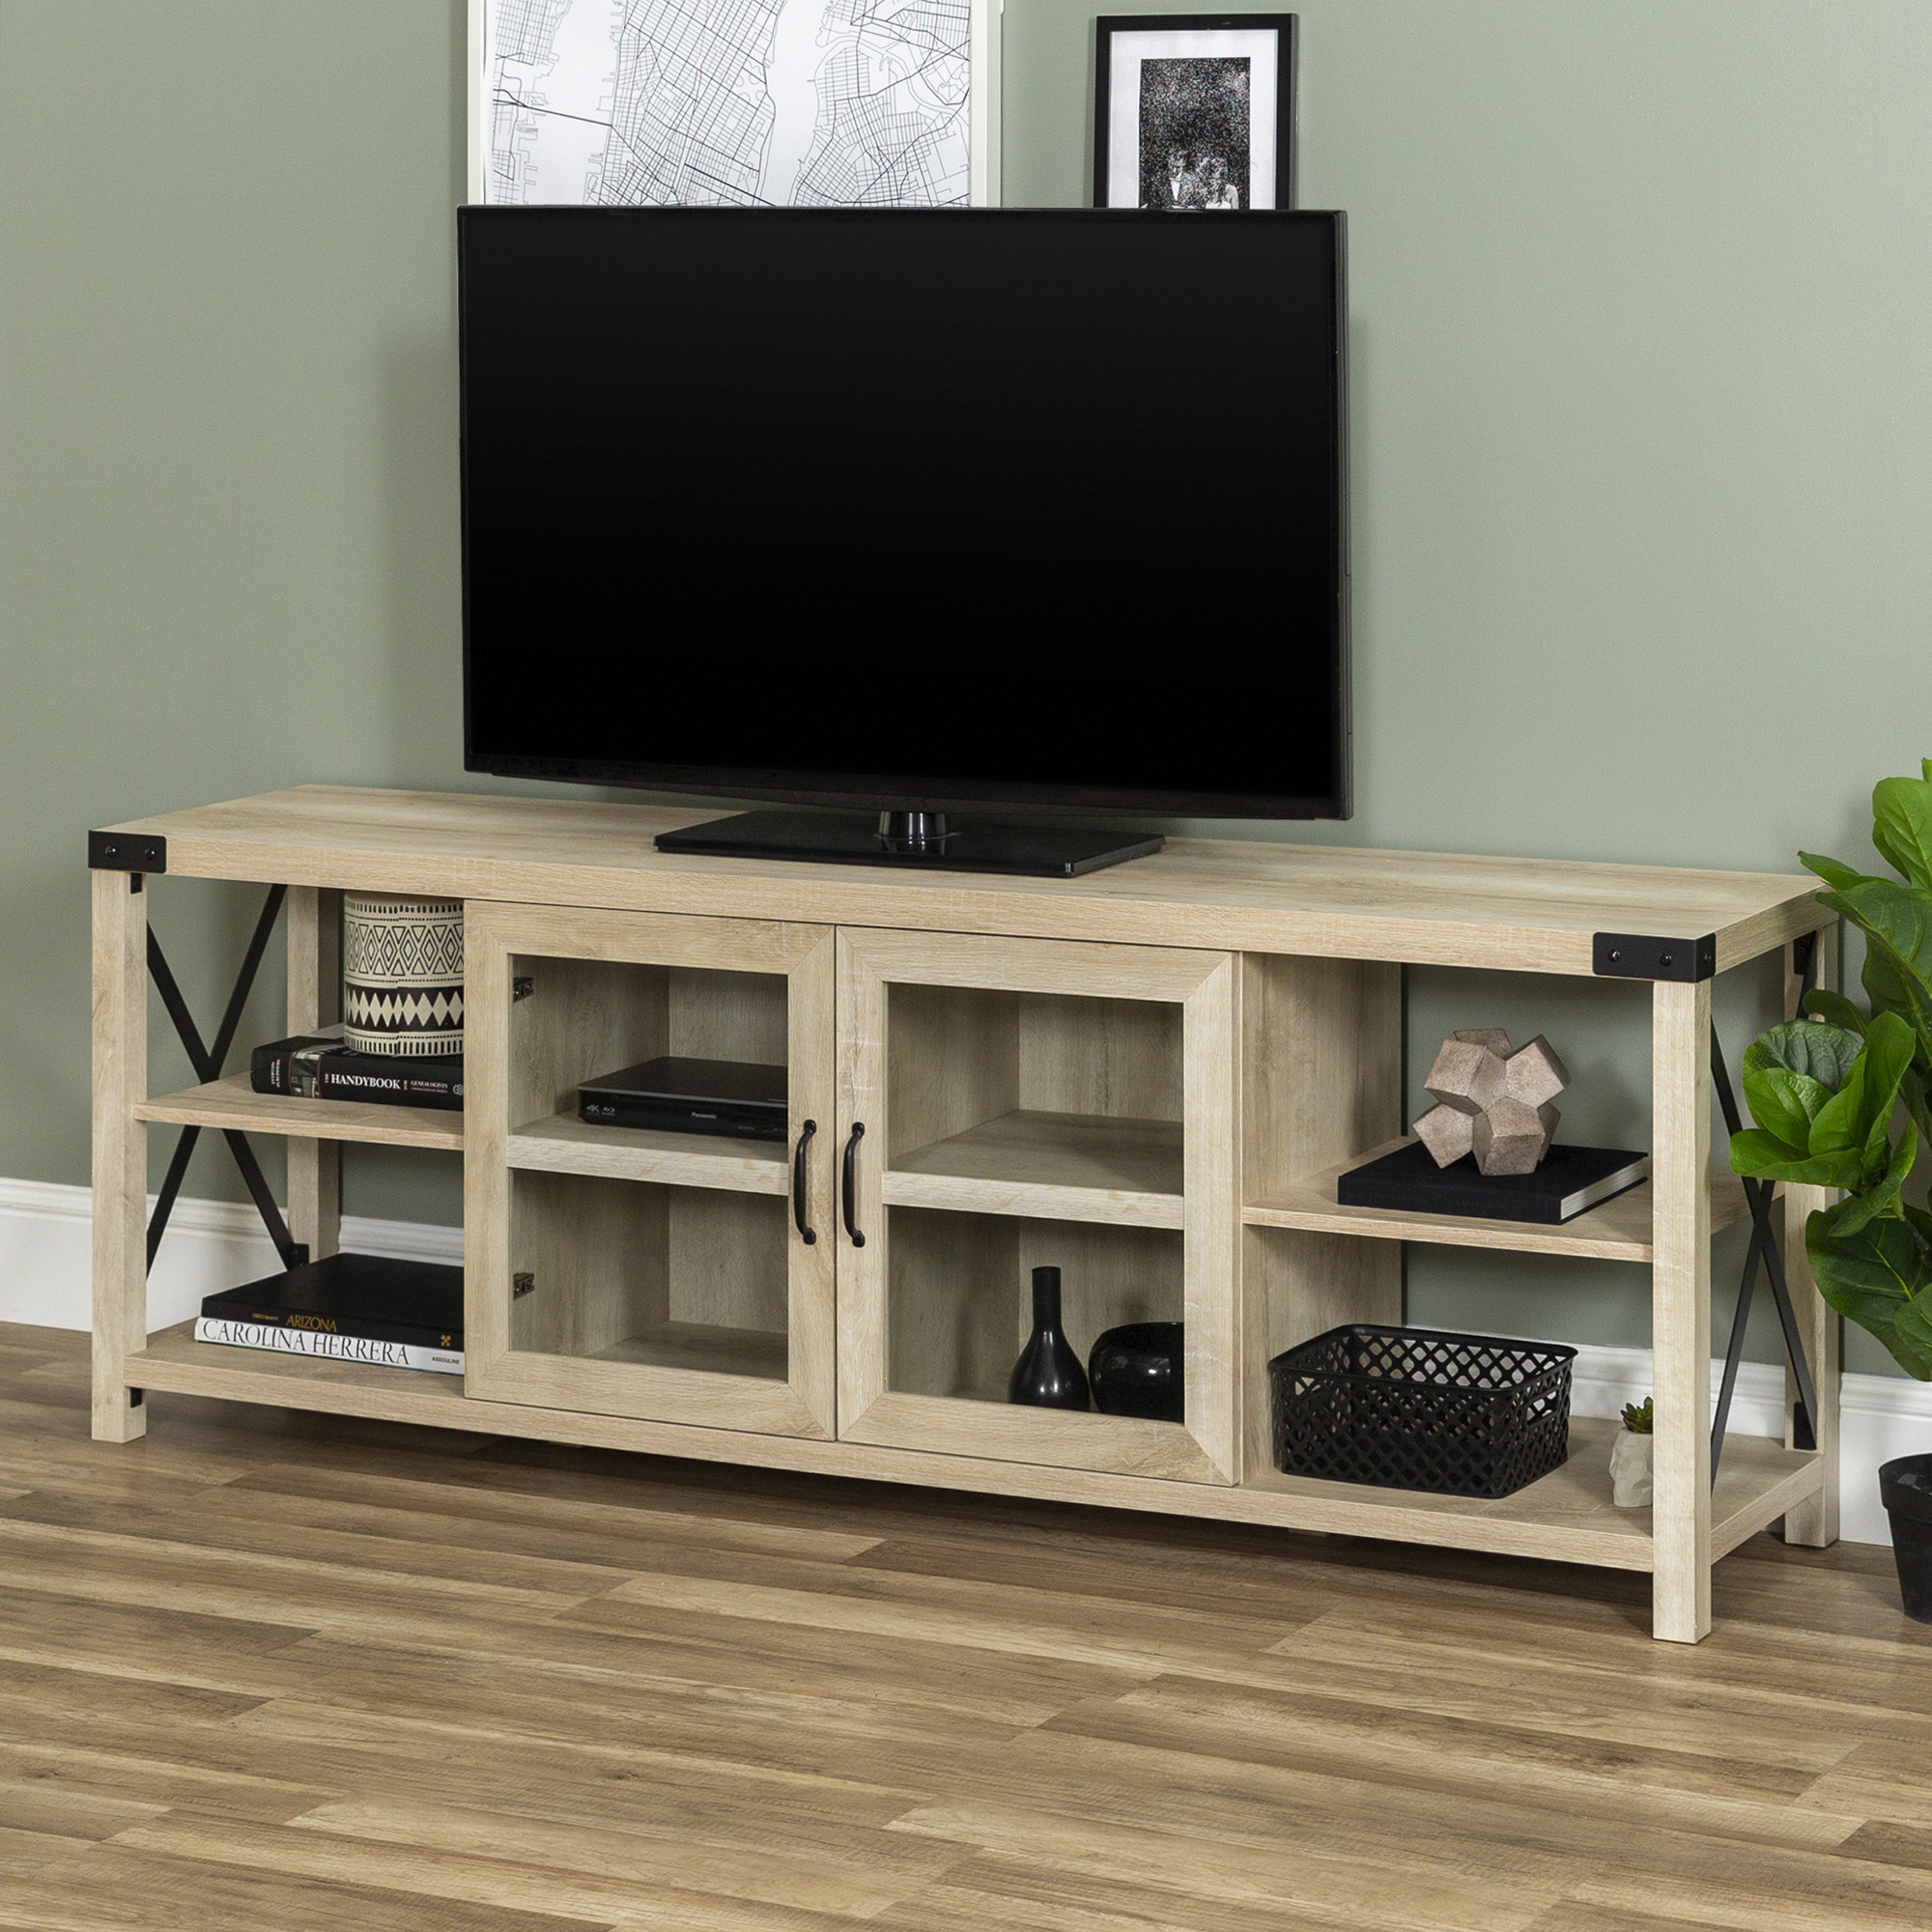 Woven Paths Farmhouse 2-Door Metal X TV Stand for TVs up to 80", White Oak - image 1 of 13